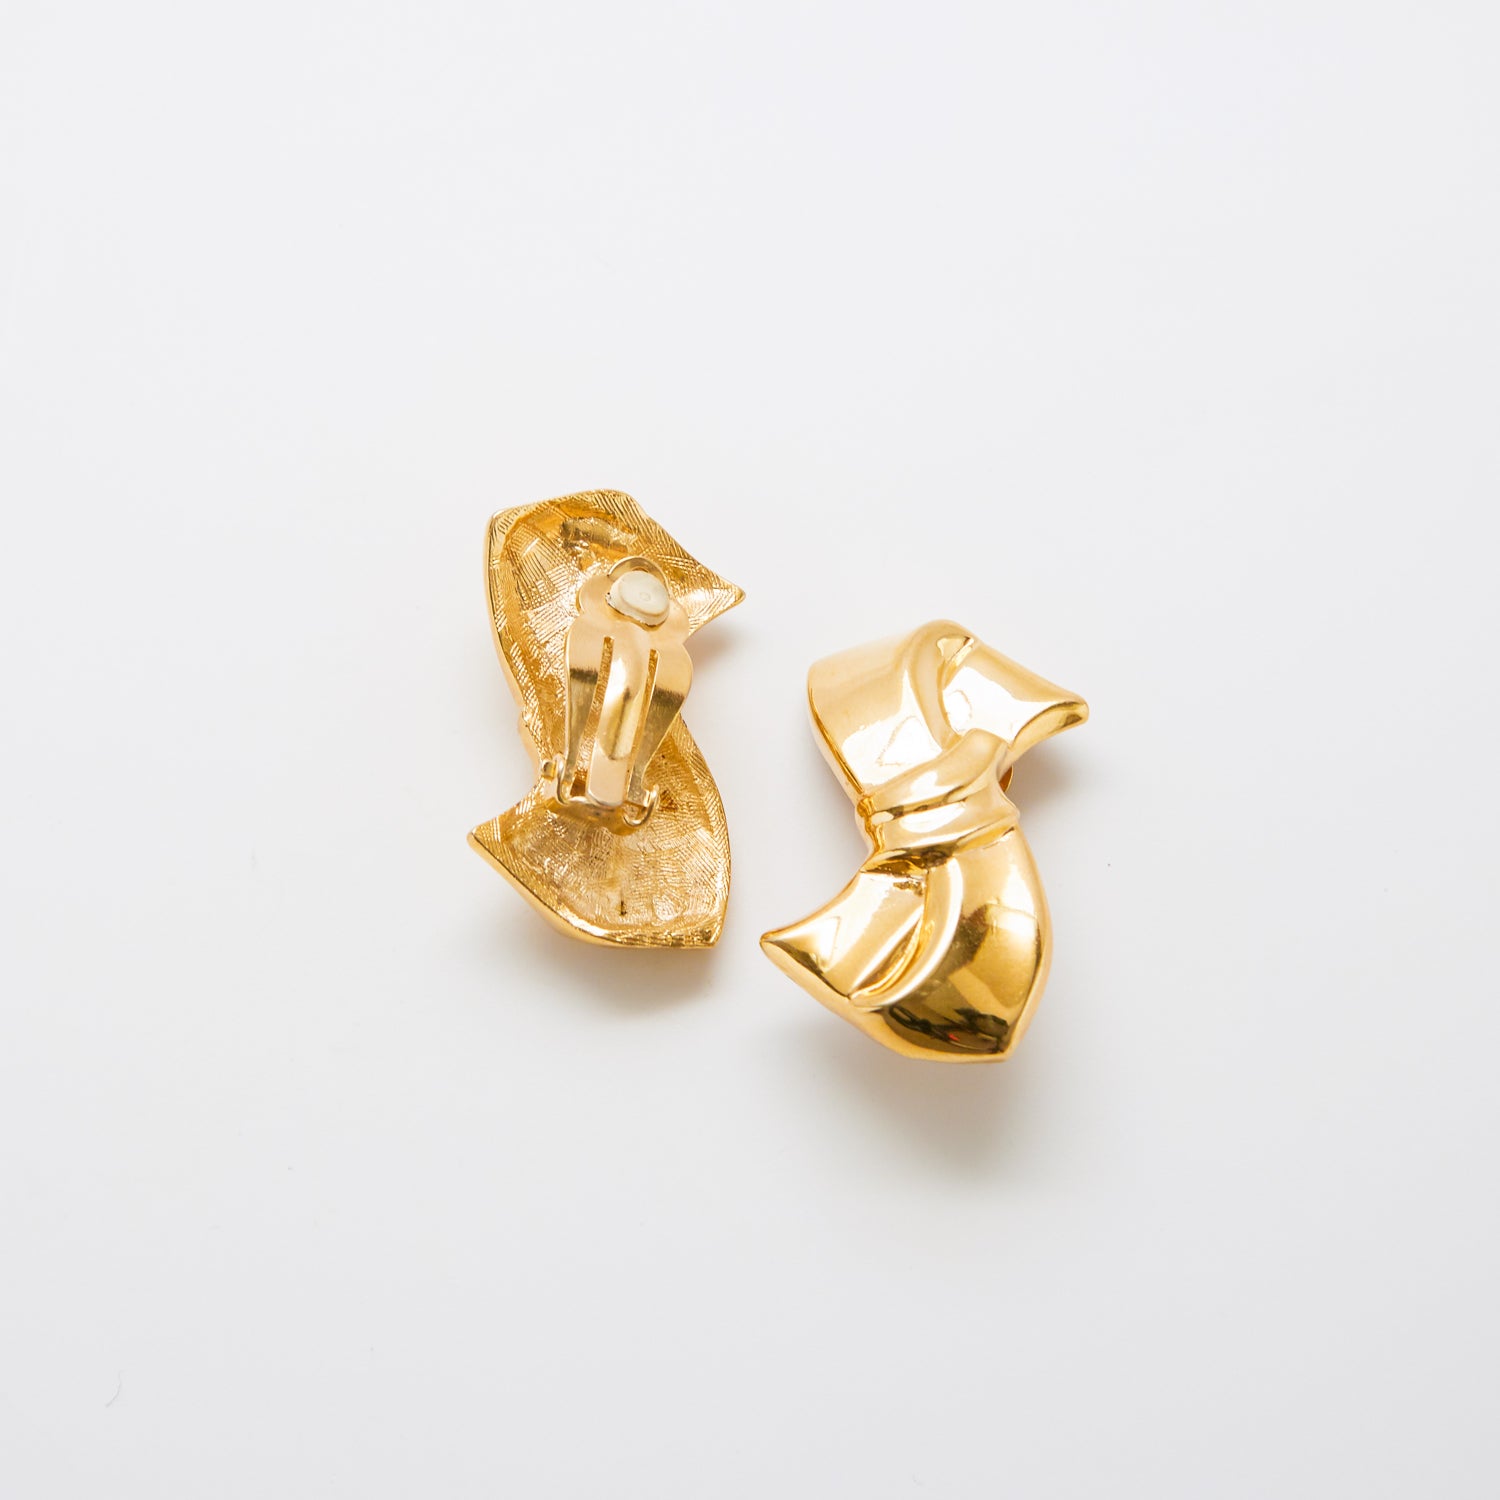 Vintage Gold Bow Earrings